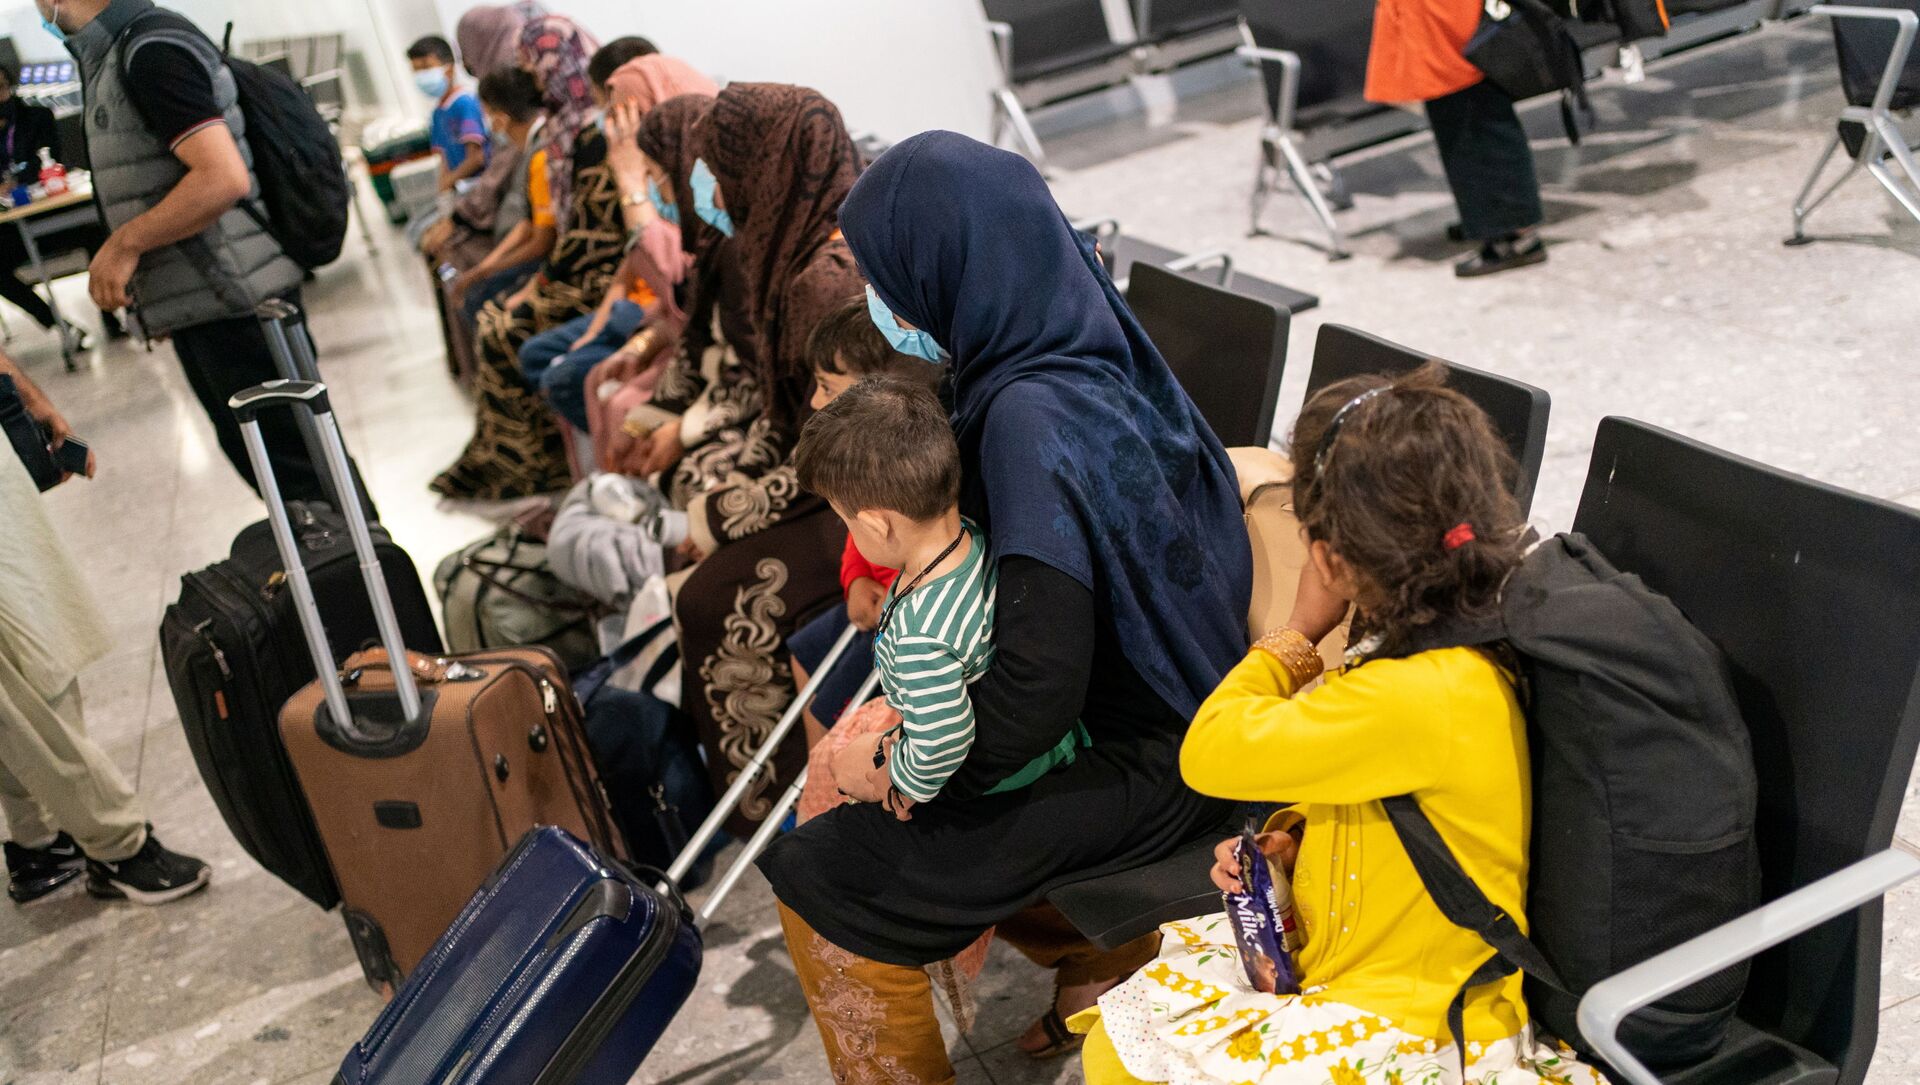 Refugees from Afghanistan wait to be processed after arriving on an evacuation flight at Heathrow Airport, in London, Britain August 26, 2021 - Sputnik International, 1920, 05.09.2021